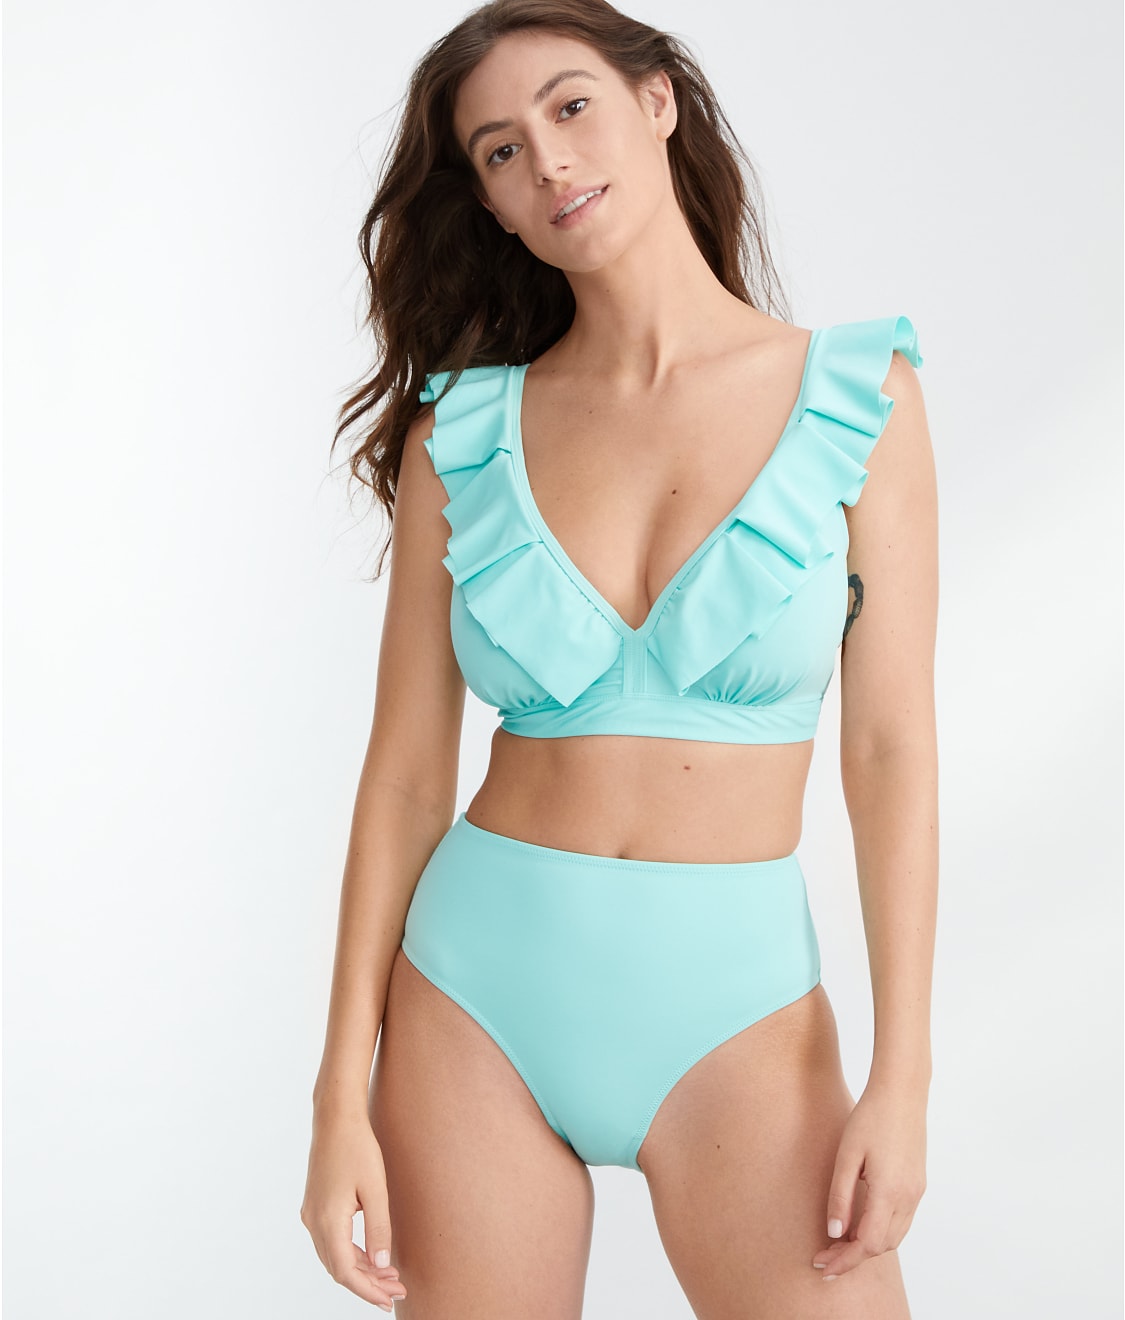 Empreinte – French luxury lingerie and swimwear – Juste Moi